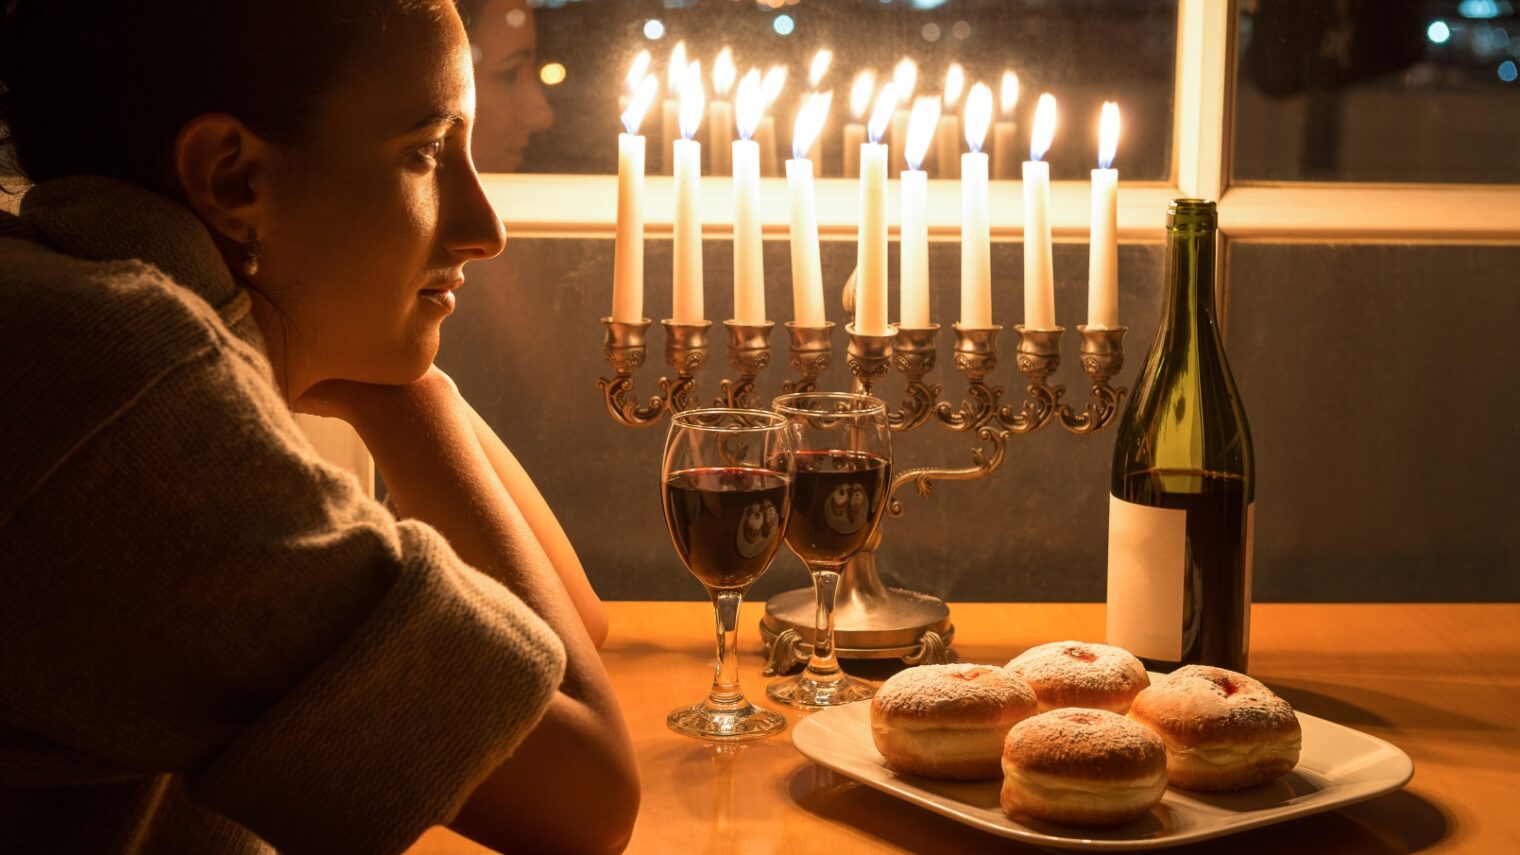 Which wine goes best with Hanukkah donuts? Photo by Nina Mikryukova/Shutterstock.com